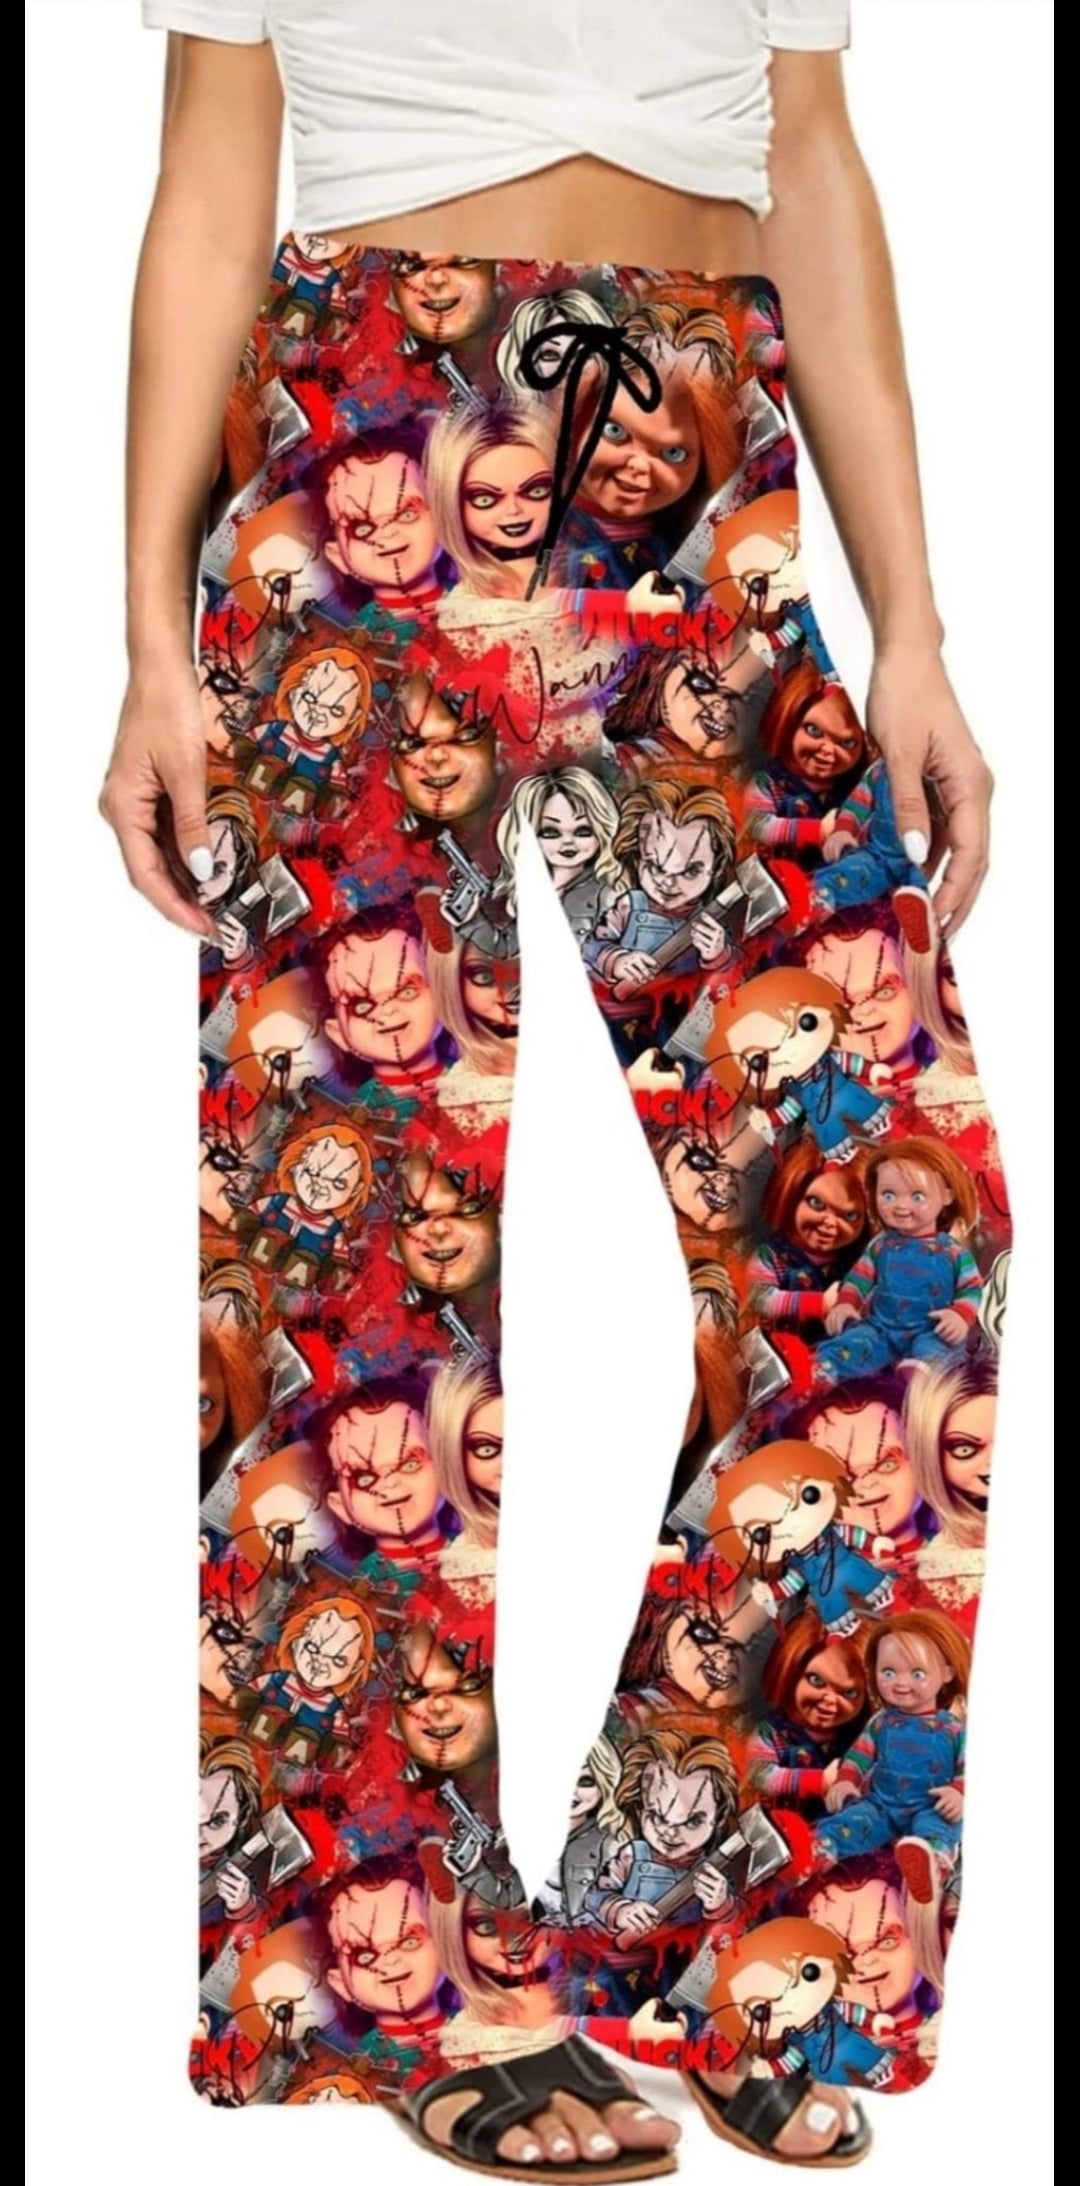 Chucky Time loungers & joggers